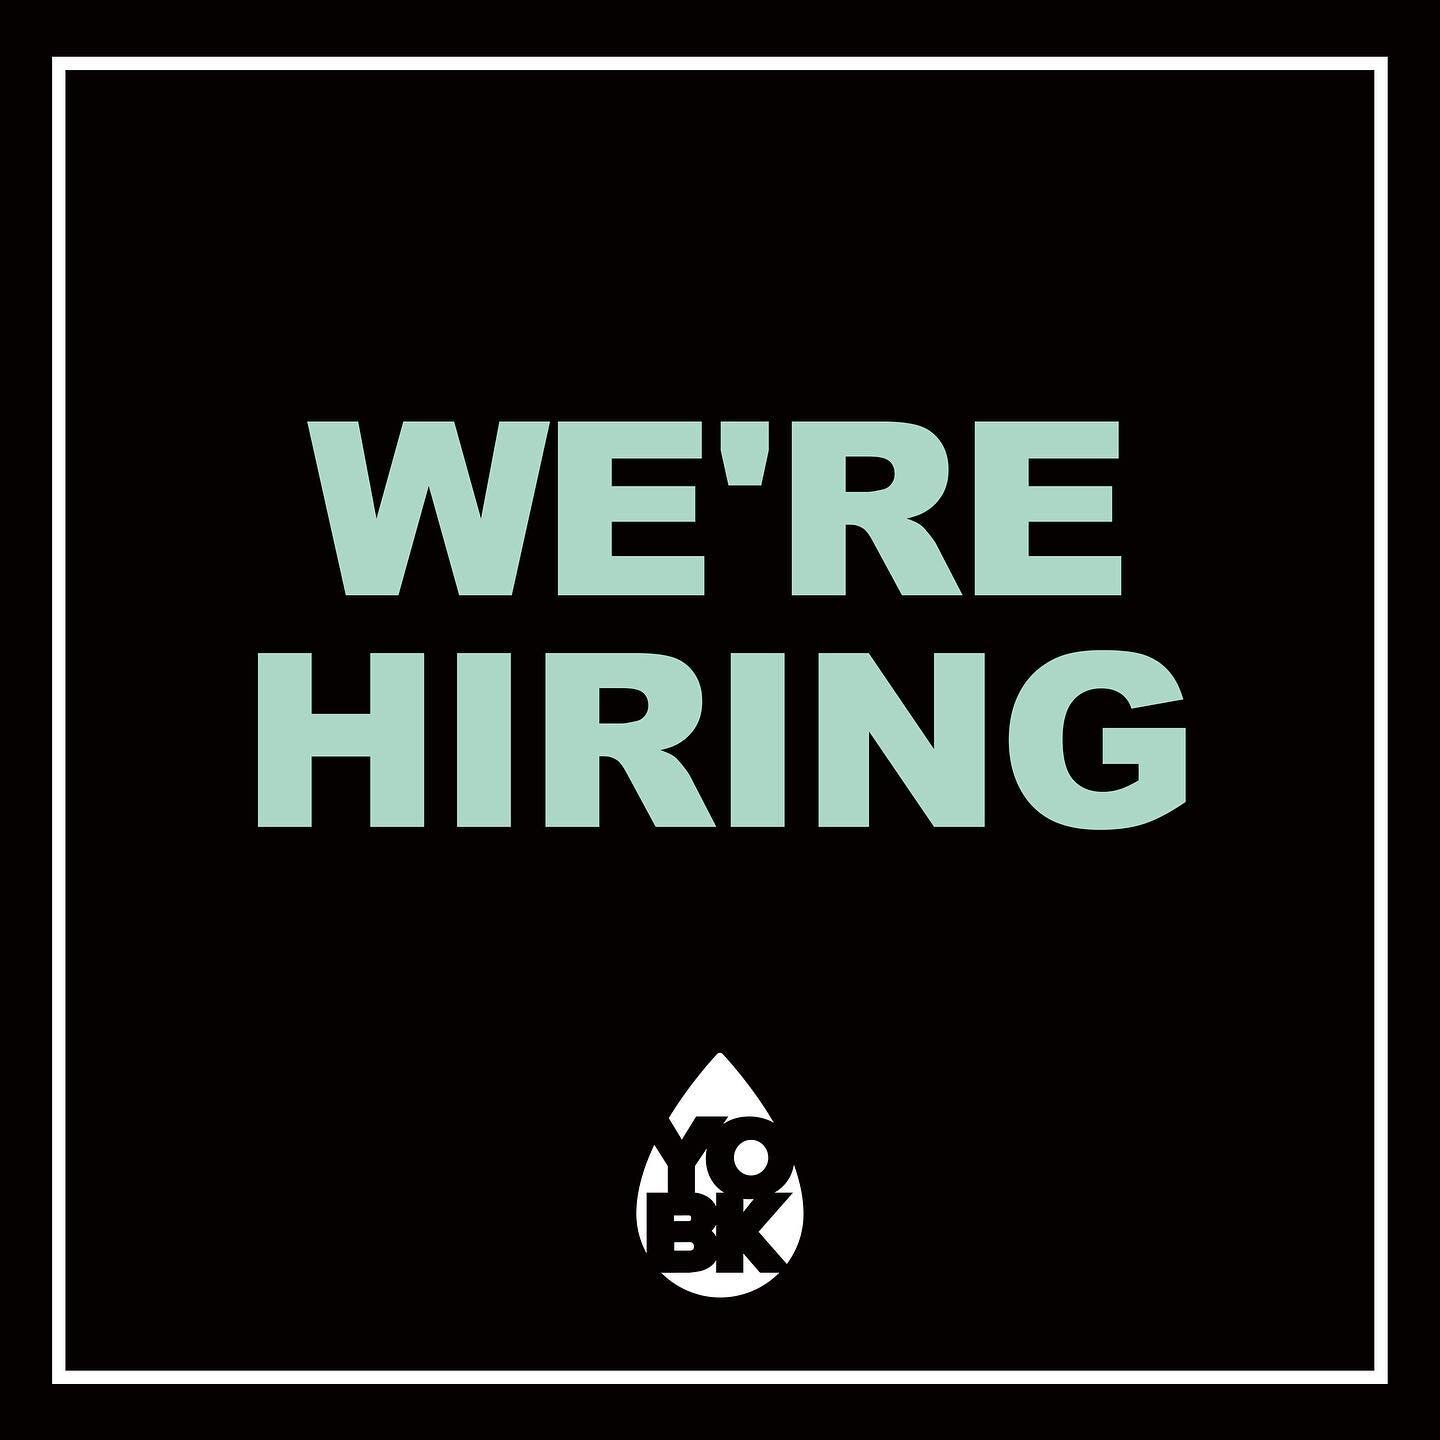 Love practicing Hot Yoga + Pilates? Want to work in a fun, supportive environment? Then this position could be right for you! 💯❤️

We&rsquo;re hiring Front of House positions at both Brooklyn locations! 🗽

This position is for you if you are&hellip